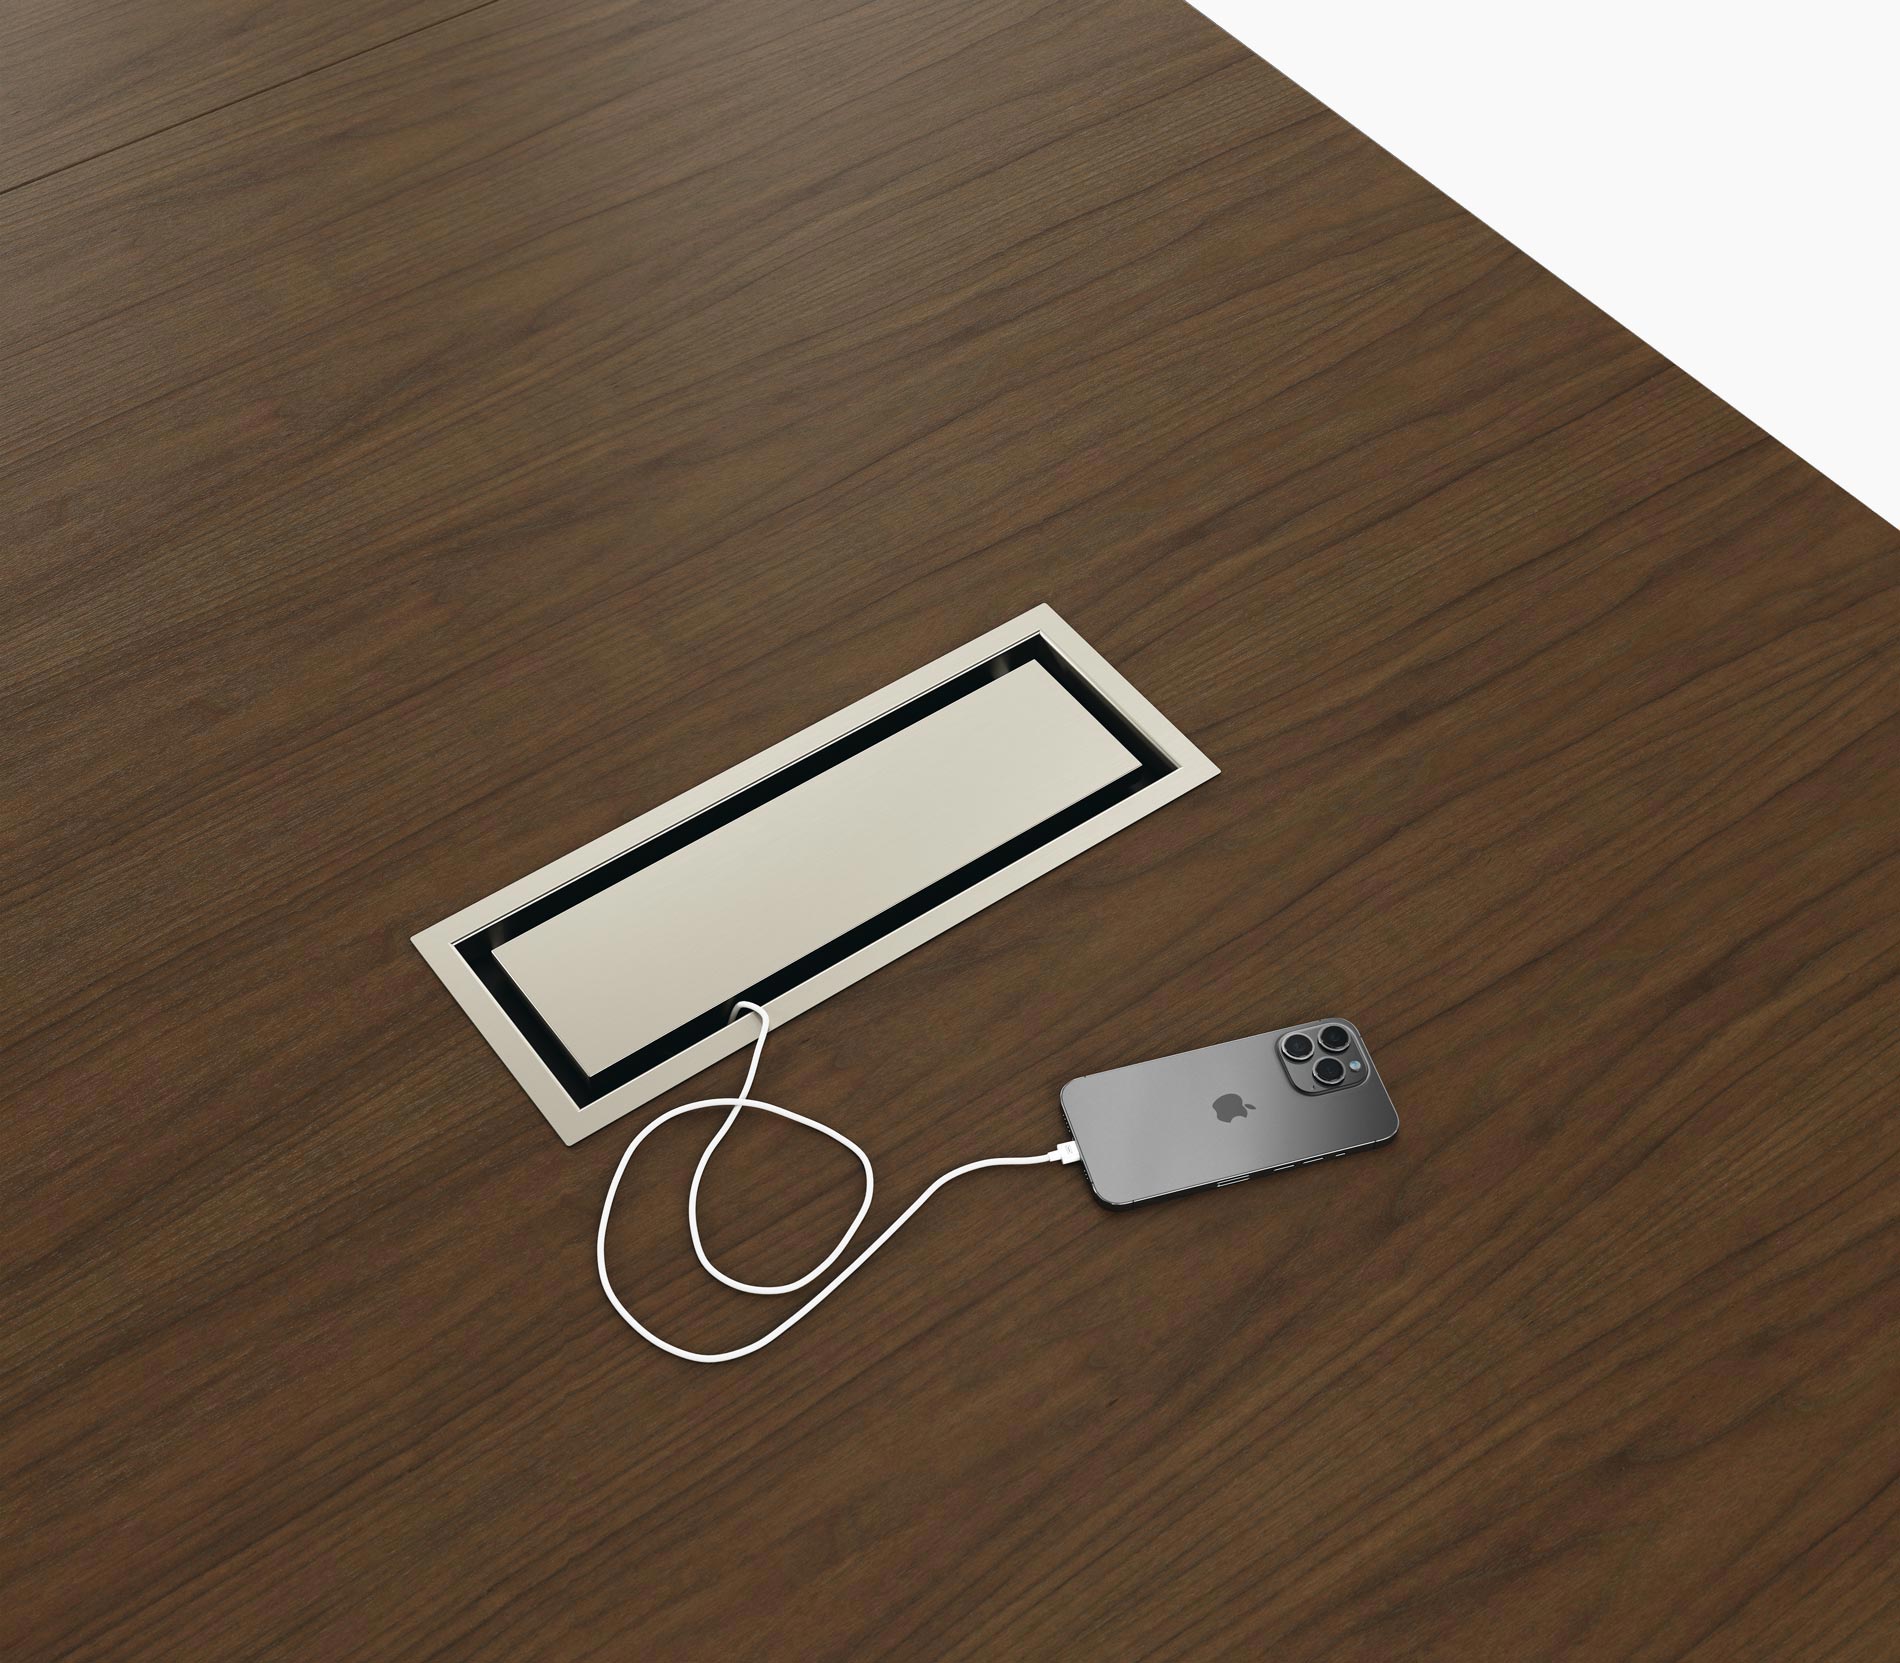 Tabletop power access on a Highline Conference Table in cashmere flat cut walnut with satin nickel details